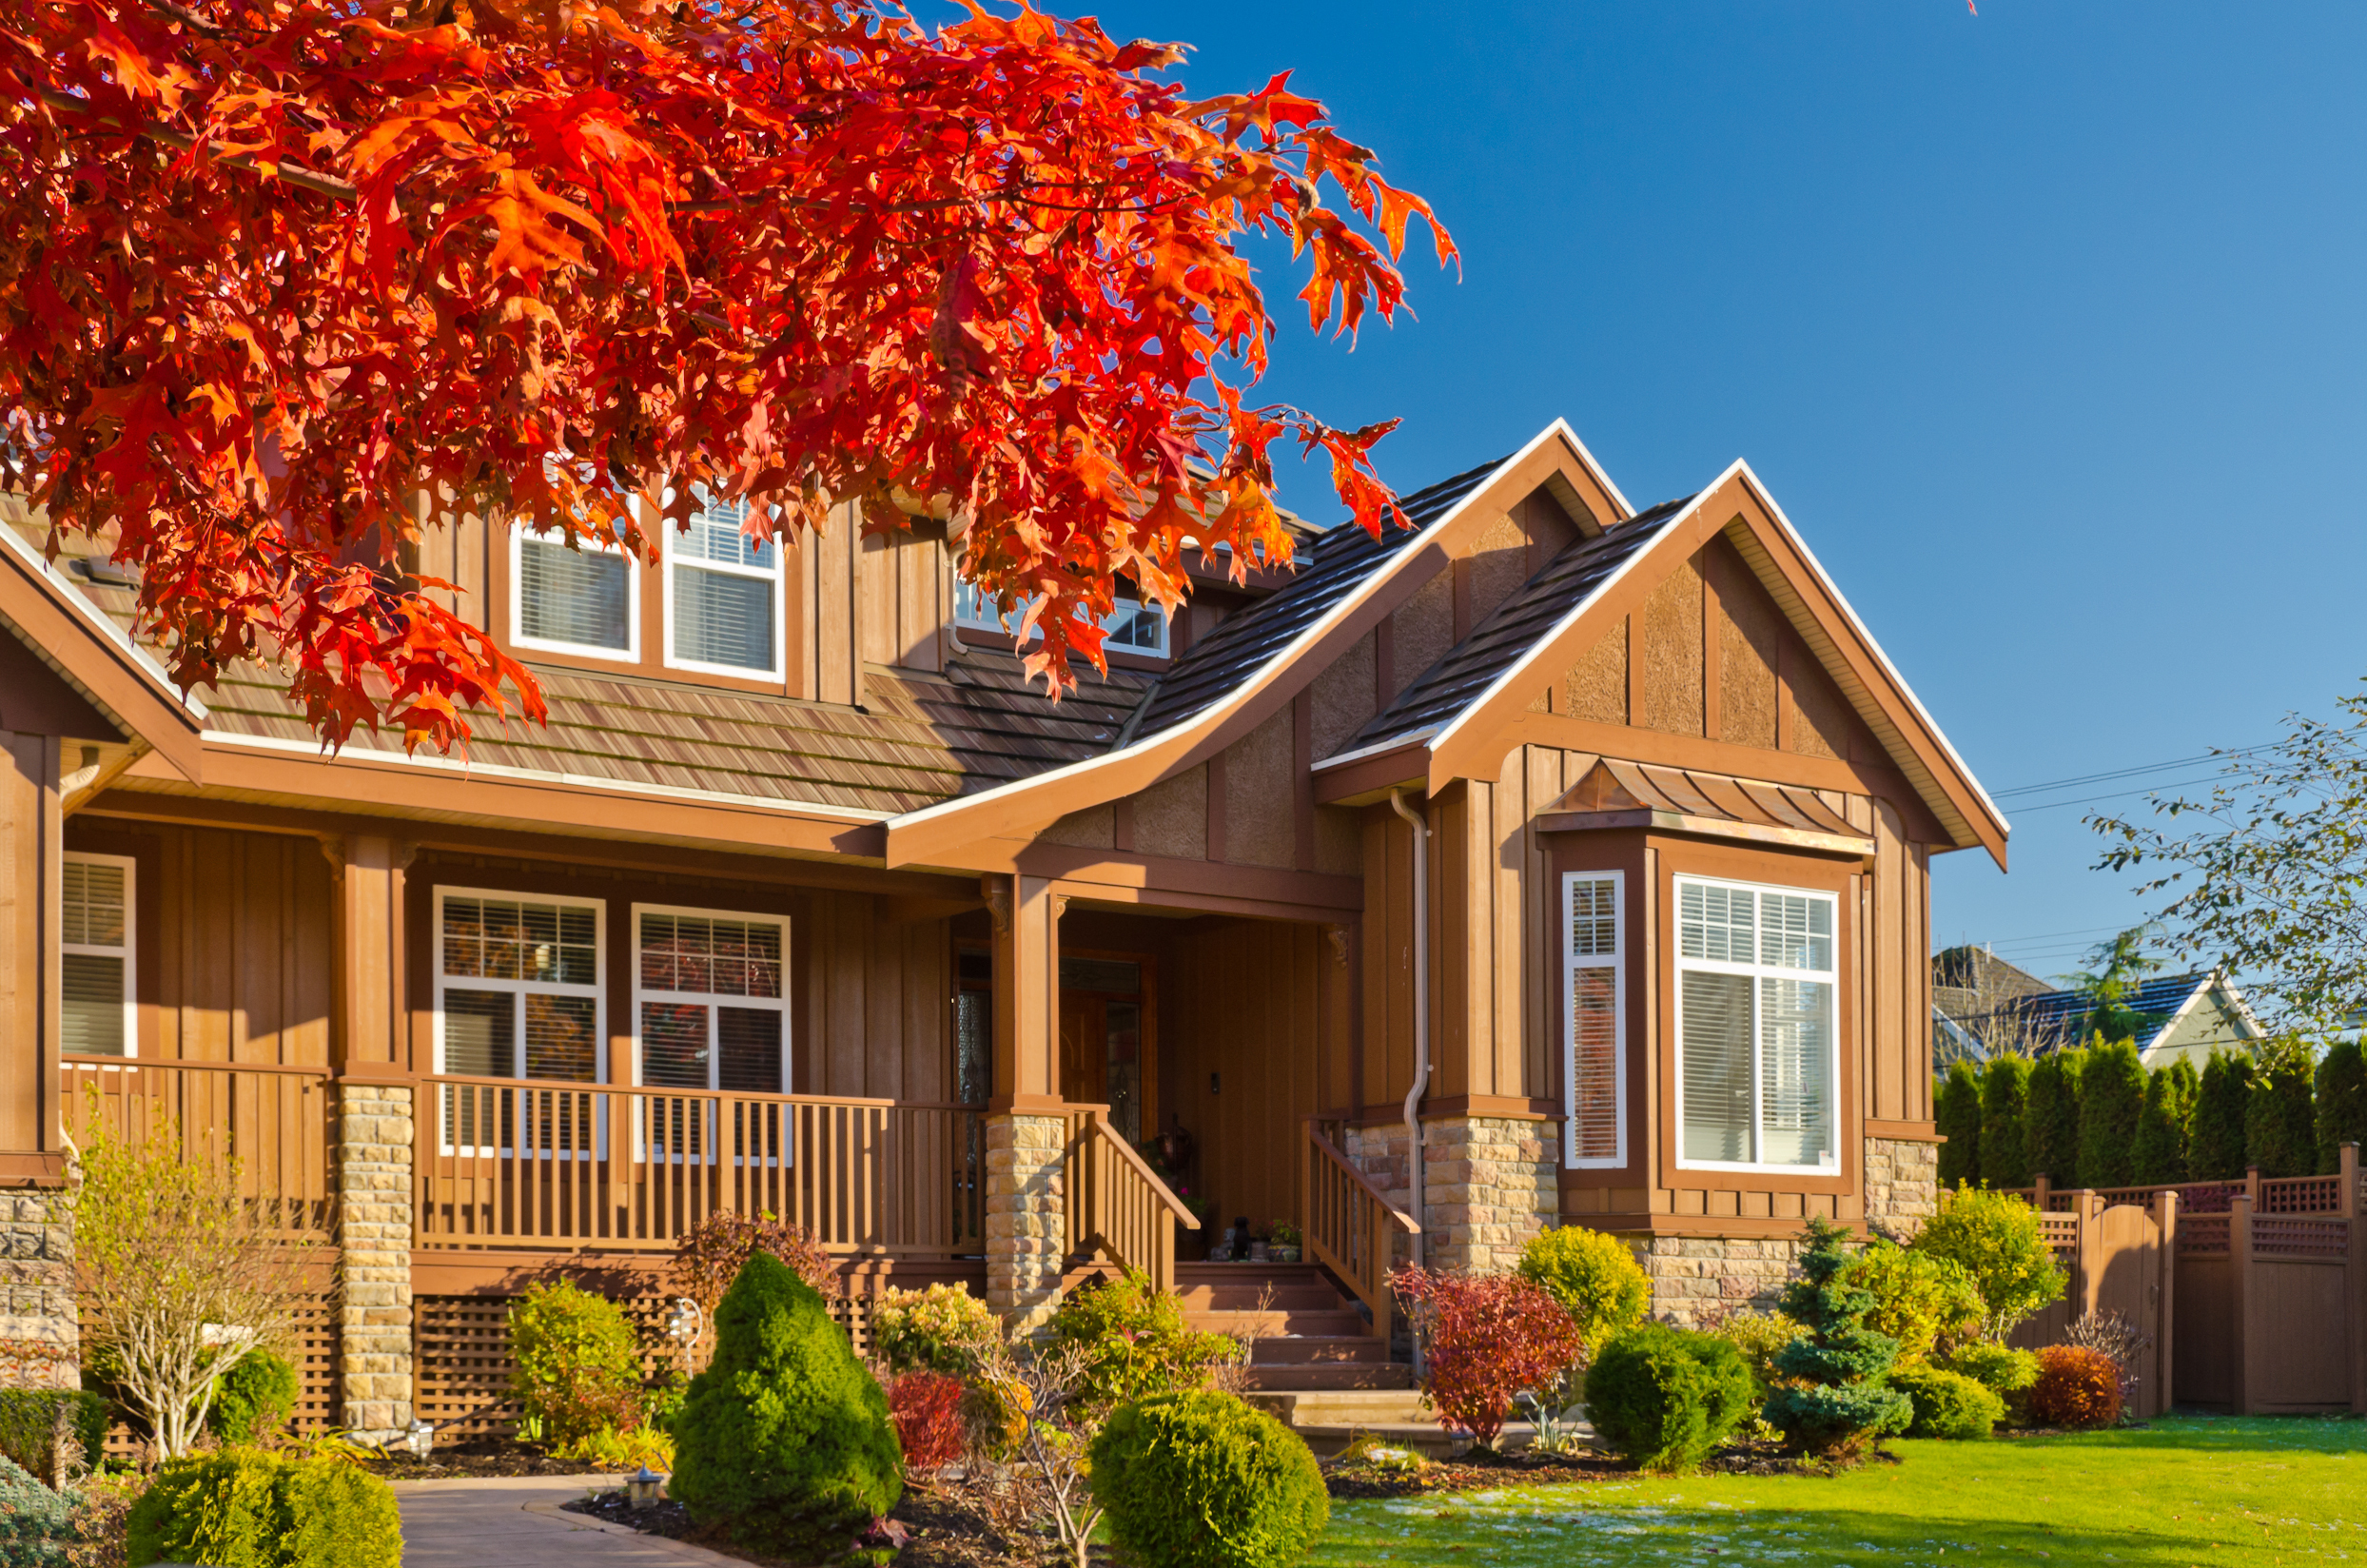 4 tempting reasons to buy a home in the fall